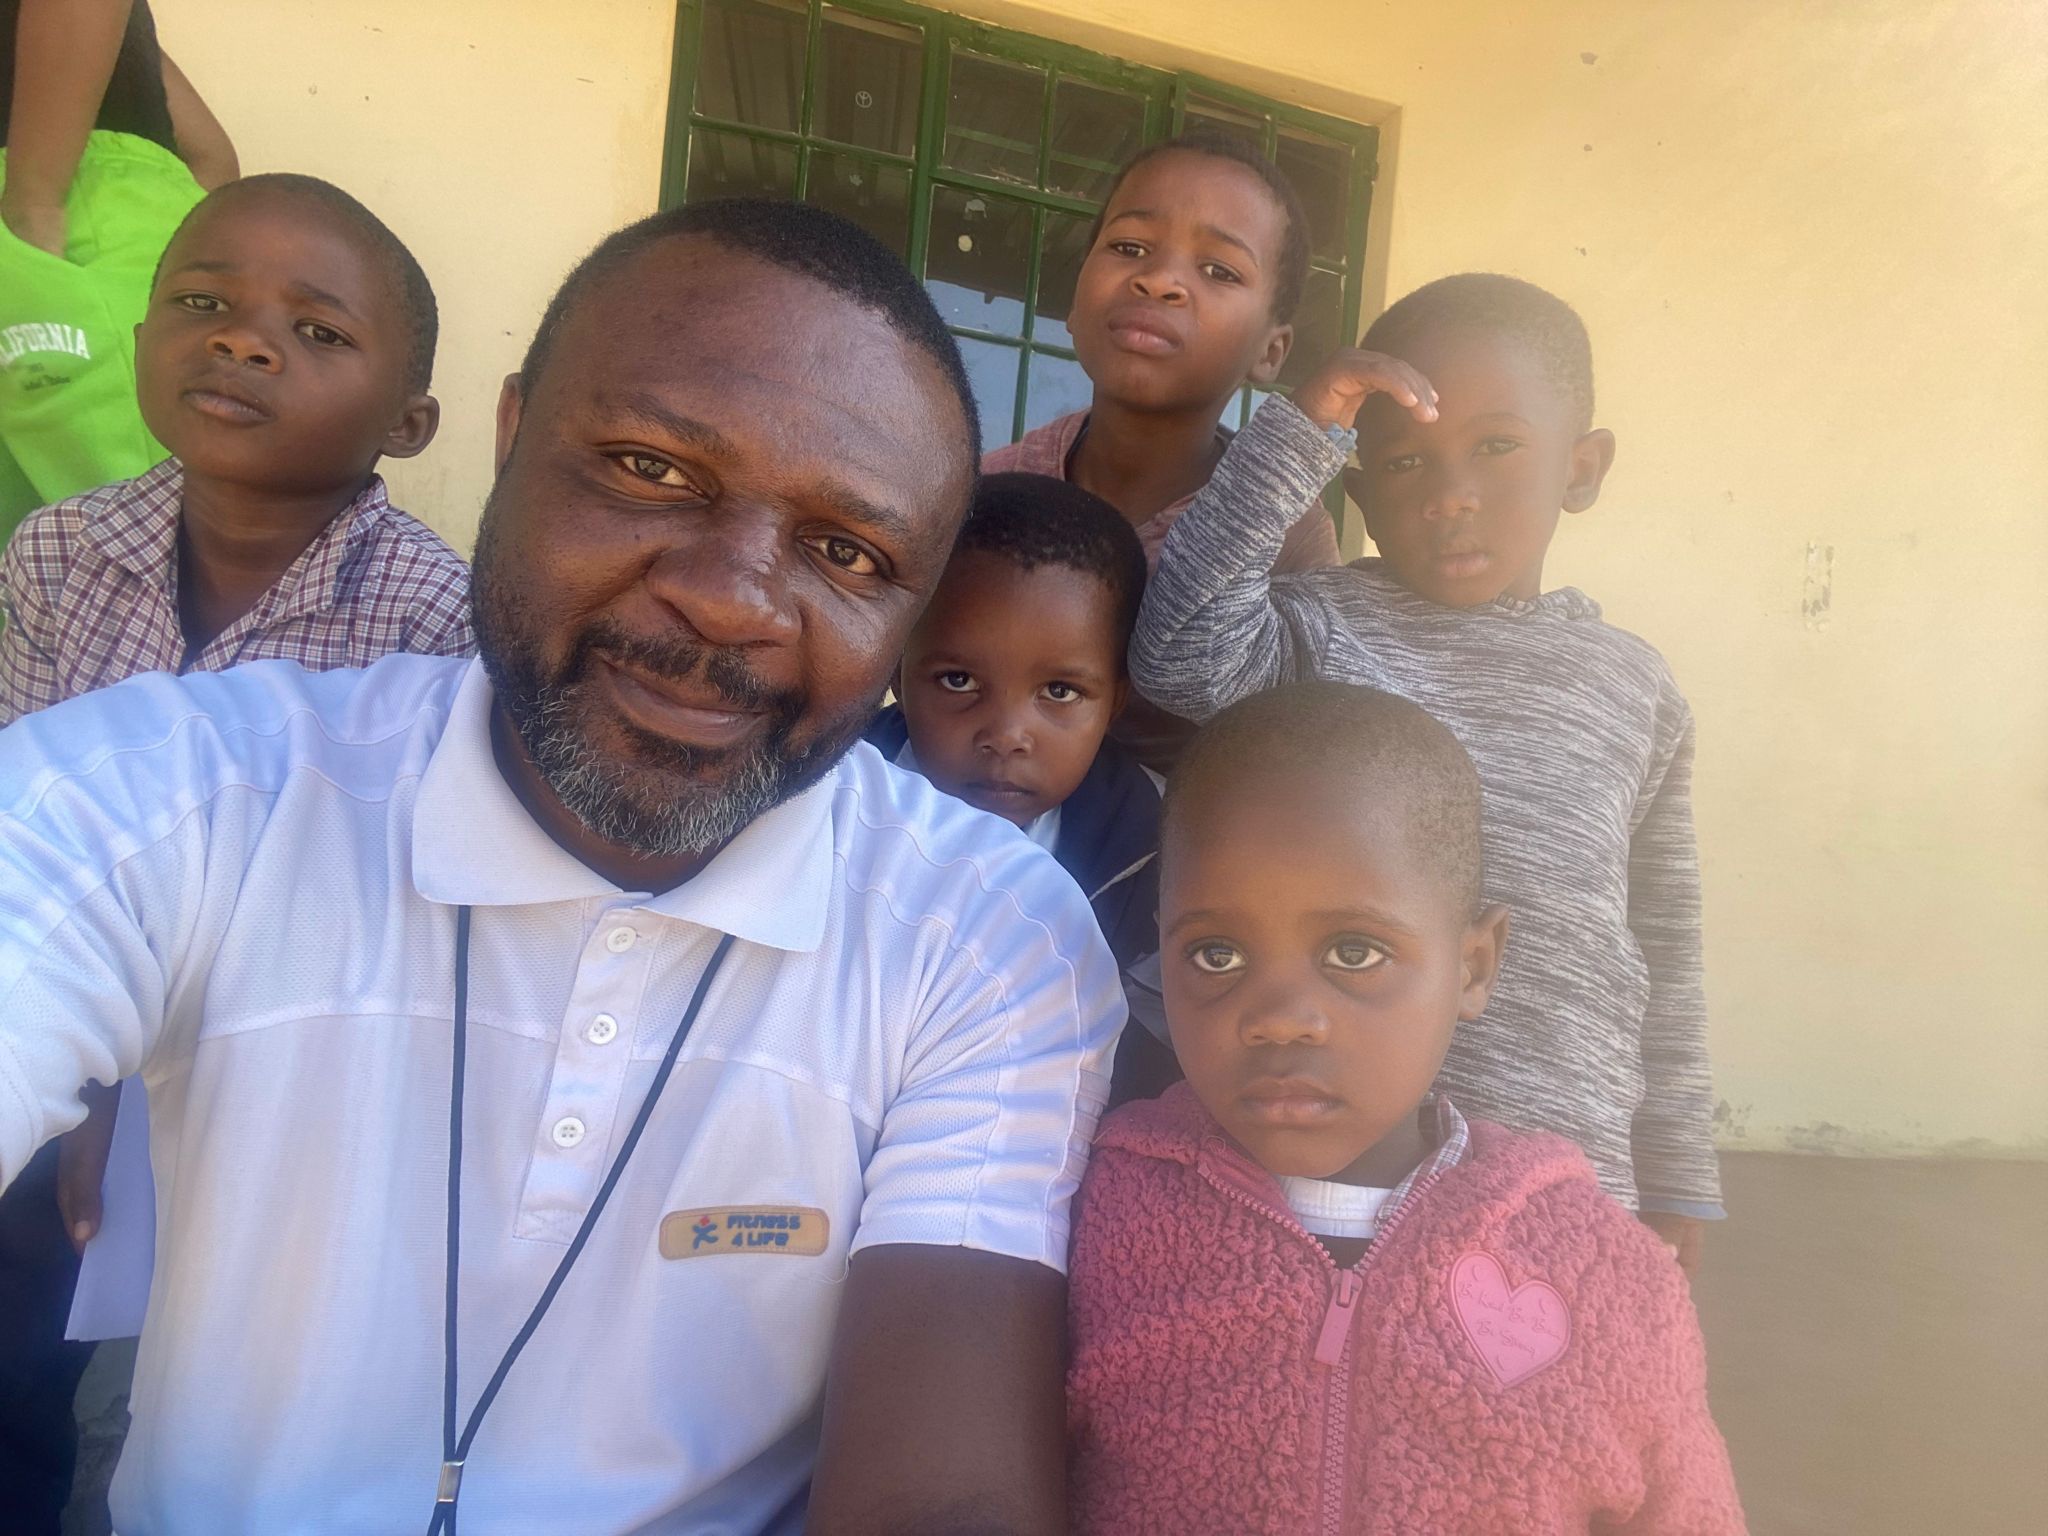 Dr. Williams Peprah in Eswatini posing with orphans for the Healing Crumbs Project